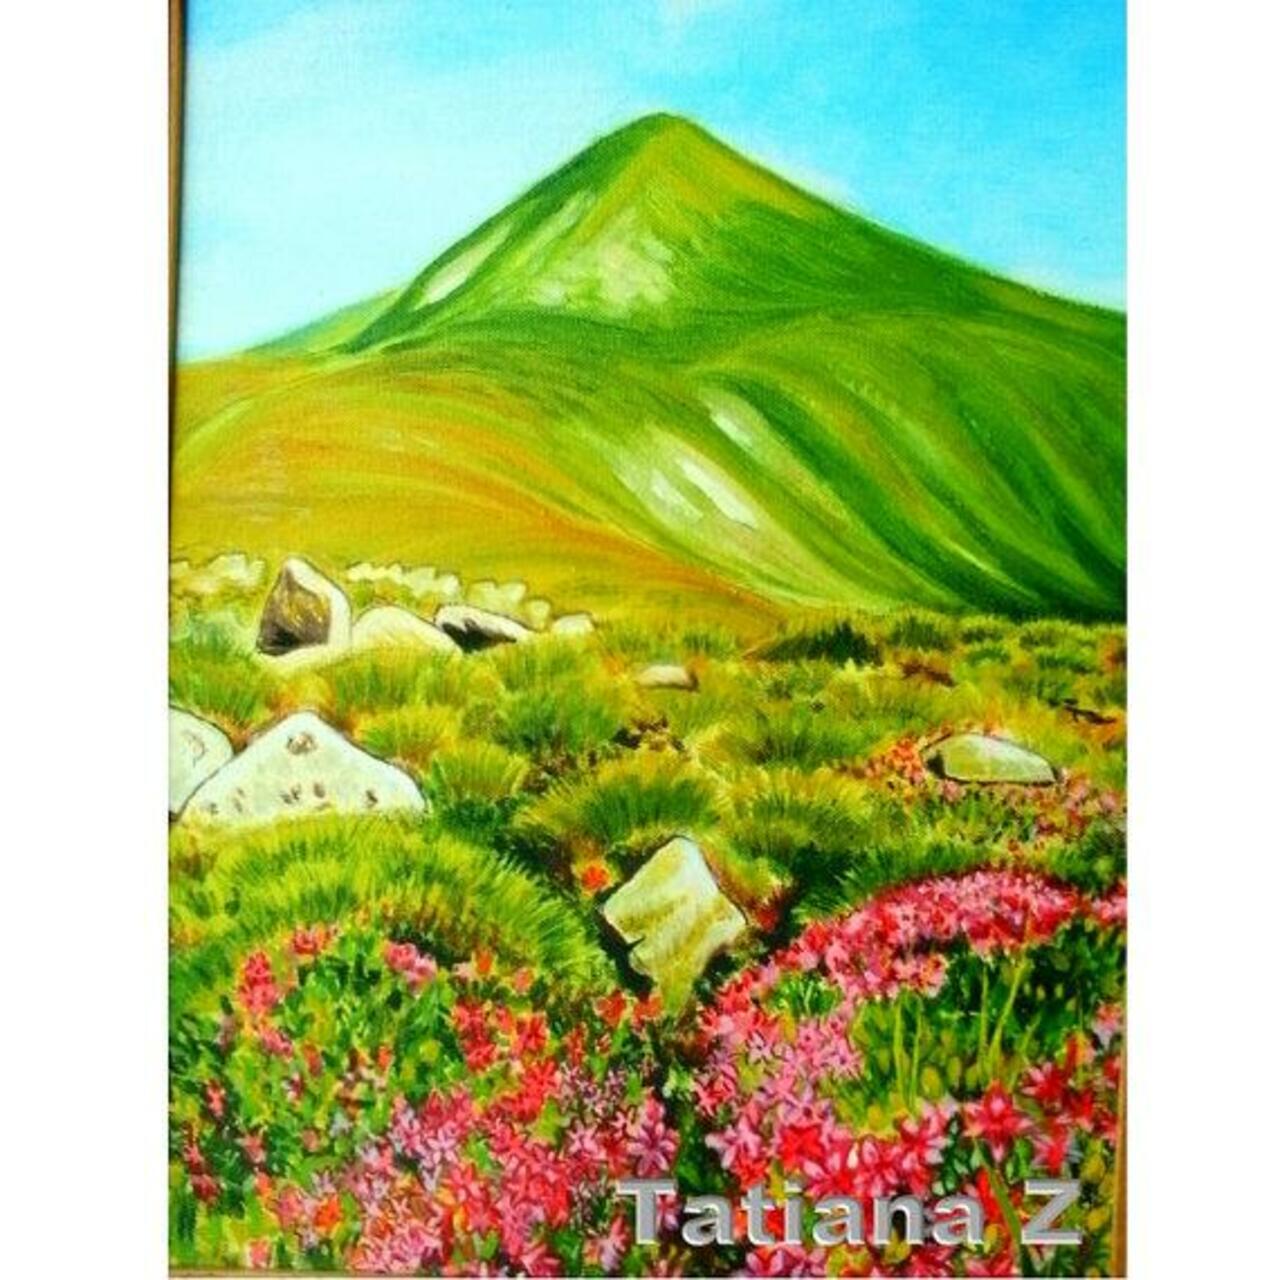 #Green Hill #original oil #painting #art #etsy #landscape http://buff.ly/1x8IW7R http://t.co/wRv3aOALvo